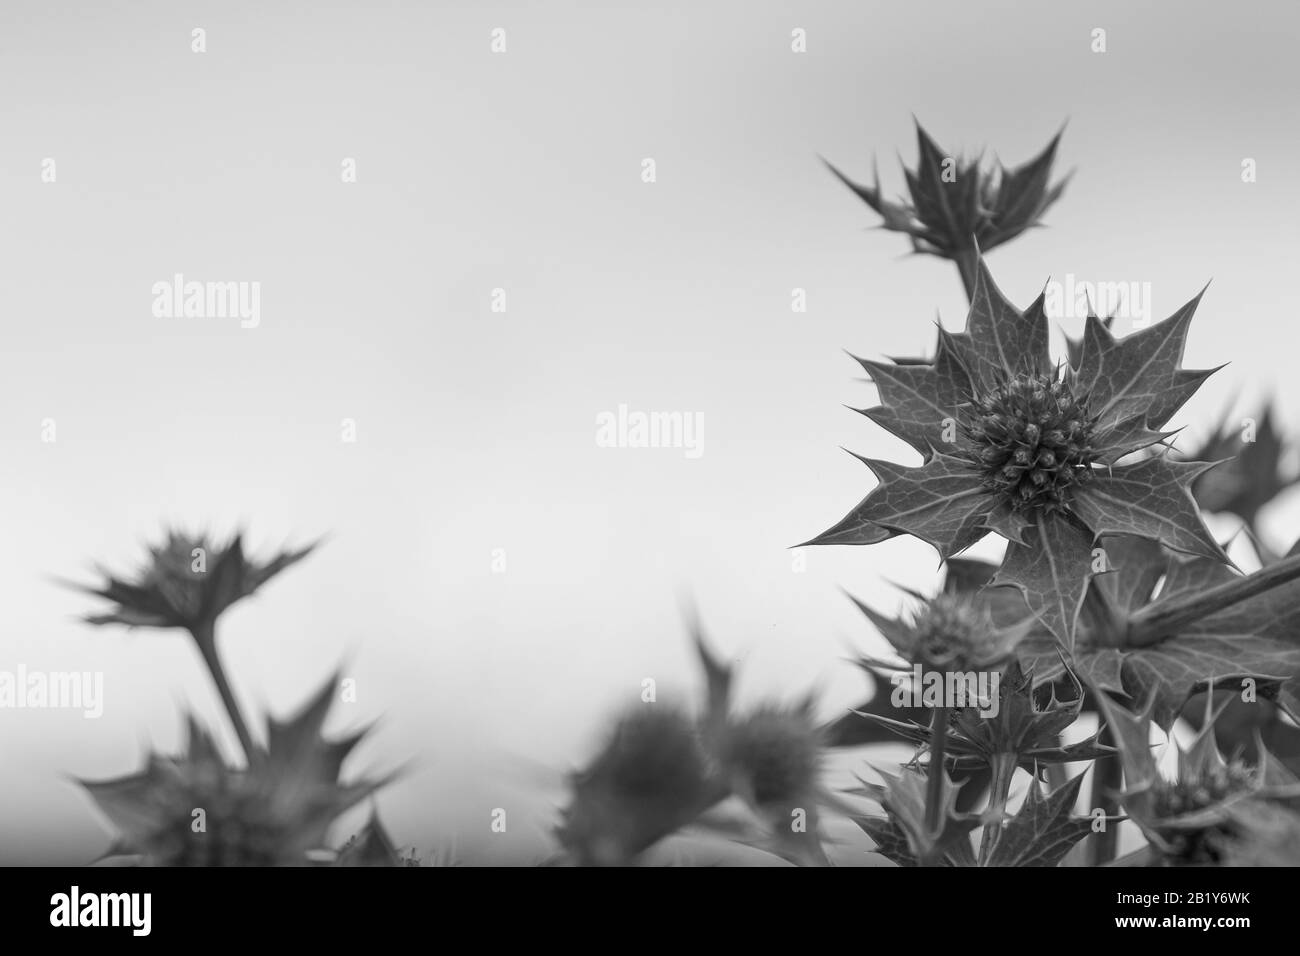 spiky sea holly leaves silhouetted against the sky in black and white Stock Photo